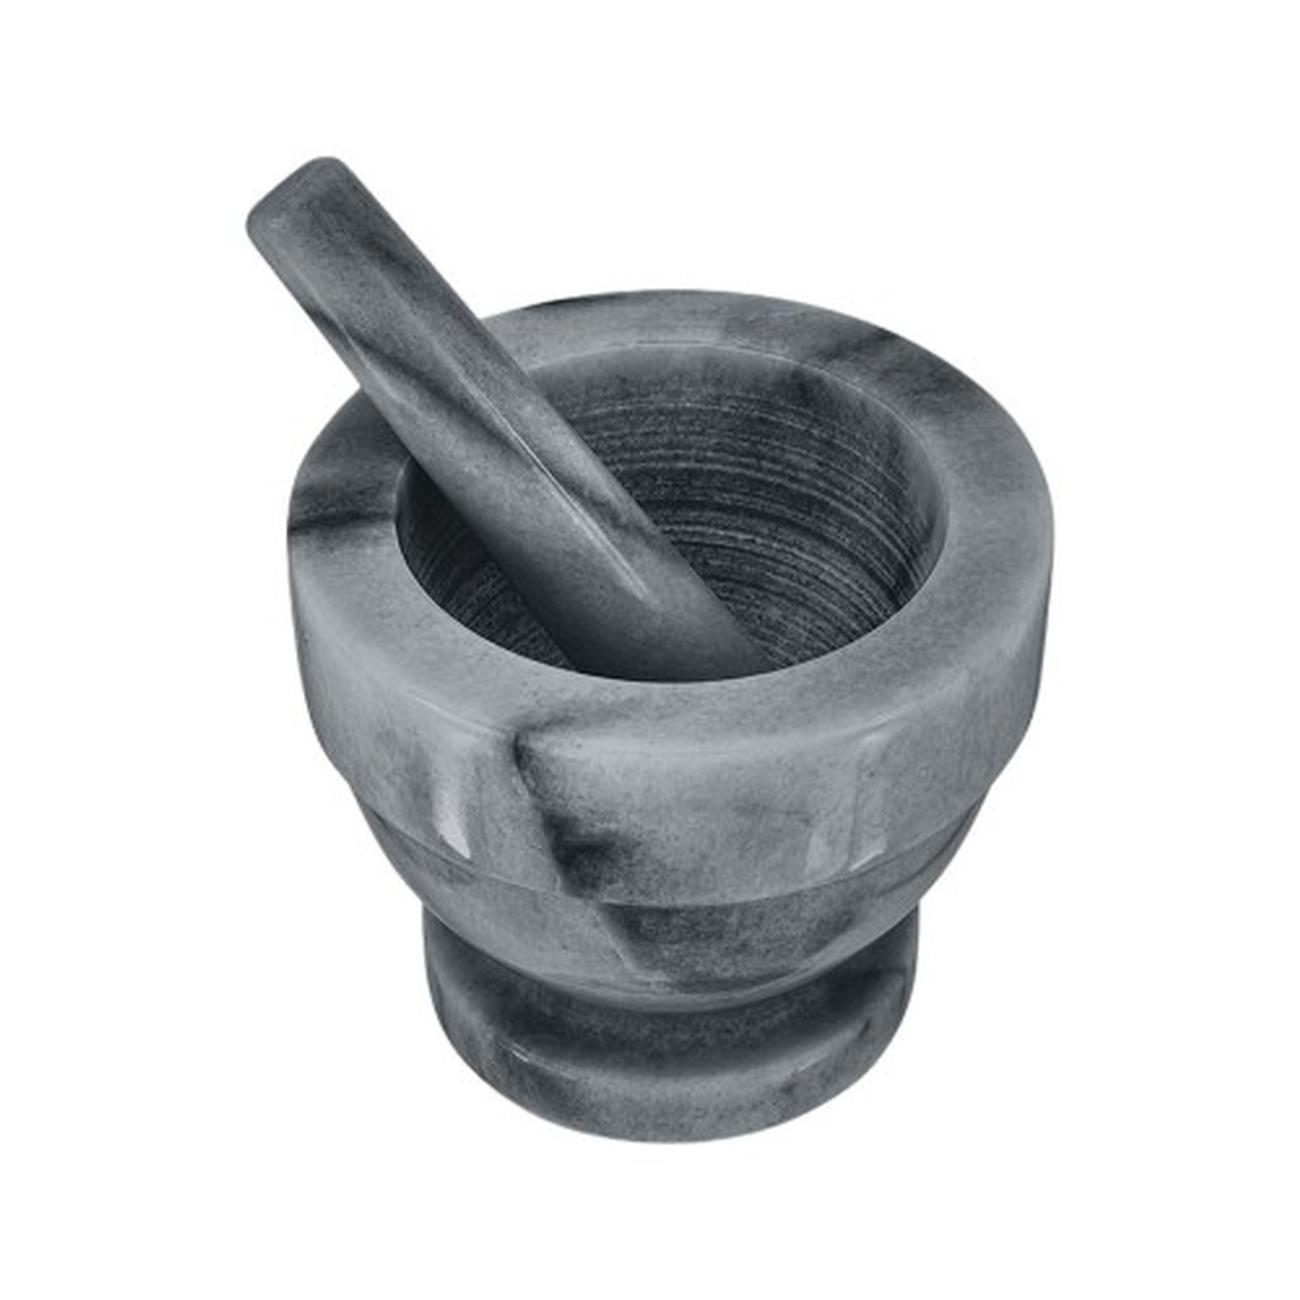 judge-marble-pestle-and-mortar - Judge Marble Pestle & Mortar